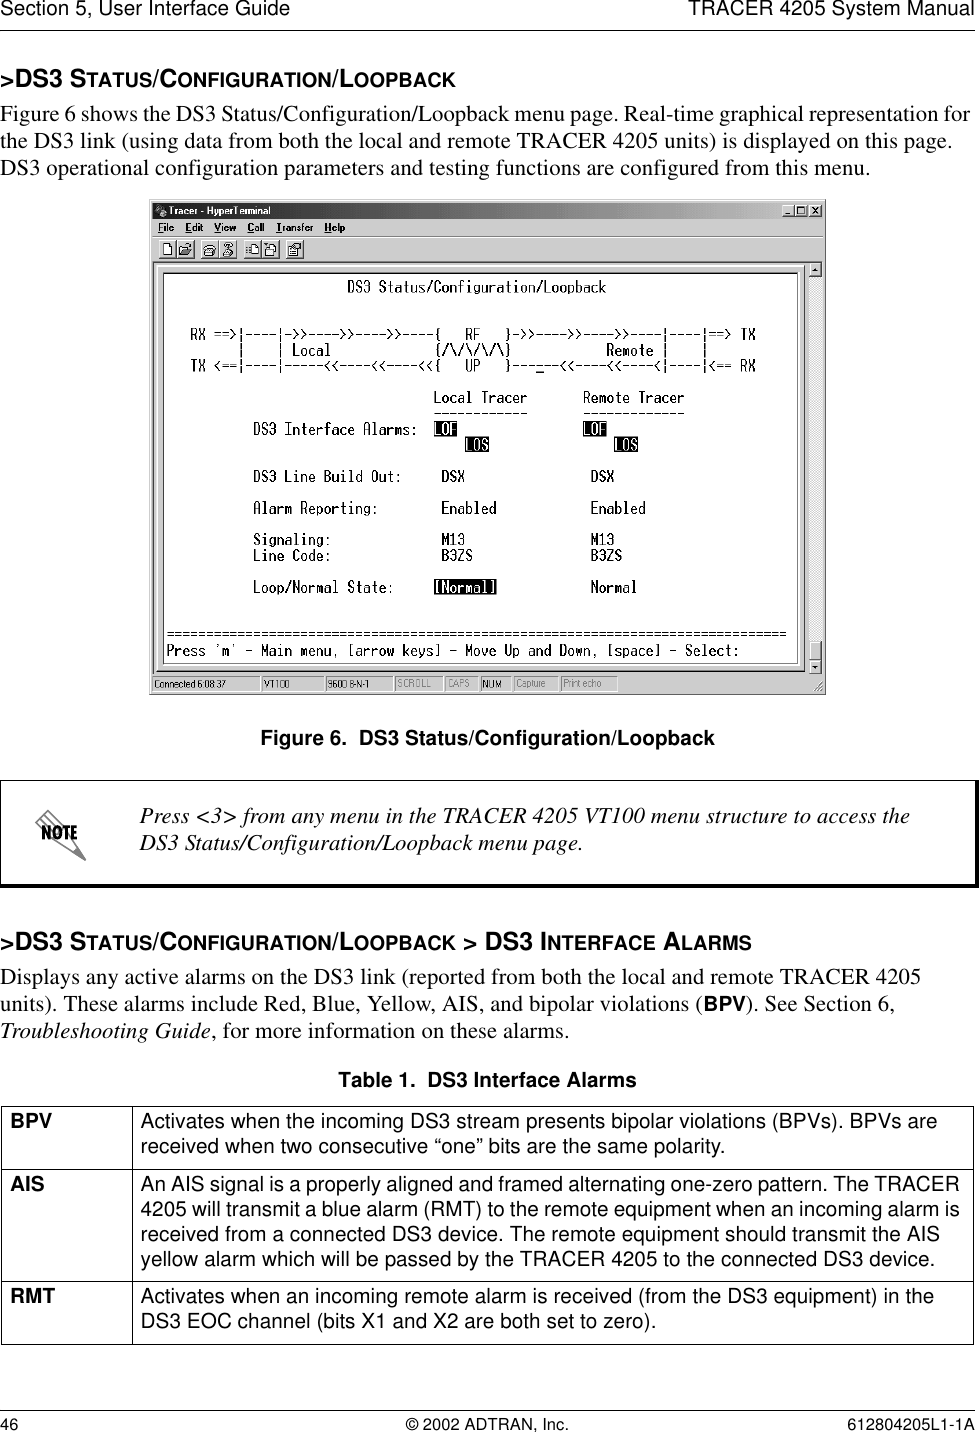 Section 5, User Interface Guide TRACER 4205 System Manual46 © 2002 ADTRAN, Inc. 612804205L1-1A&gt;DS3 STATUS/CONFIGURATION/LOOPBACKFigure 6 shows the DS3 Status/Configuration/Loopback menu page. Real-time graphical representation for the DS3 link (using data from both the local and remote TRACER 4205 units) is displayed on this page. DS3 operational configuration parameters and testing functions are configured from this menu.Figure 6.  DS3 Status/Configuration/Loopback&gt;DS3 STATUS/CONFIGURATION/LOOPBACK &gt; DS3 INTERFACE ALARMSDisplays any active alarms on the DS3 link (reported from both the local and remote TRACER 4205 units). These alarms include Red, Blue, Yellow, AIS, and bipolar violations (BPV). See Section 6, Troubleshooting Guide, for more information on these alarms.Press &lt;3&gt; from any menu in the TRACER 4205 VT100 menu structure to access the DS3 Status/Configuration/Loopback menu page.Table 1.  DS3 Interface AlarmsBPV Activates when the incoming DS3 stream presents bipolar violations (BPVs). BPVs are received when two consecutive “one” bits are the same polarity.AIS An AIS signal is a properly aligned and framed alternating one-zero pattern. The TRACER 4205 will transmit a blue alarm (RMT) to the remote equipment when an incoming alarm is received from a connected DS3 device. The remote equipment should transmit the AIS yellow alarm which will be passed by the TRACER 4205 to the connected DS3 device.RMT Activates when an incoming remote alarm is received (from the DS3 equipment) in the DS3 EOC channel (bits X1 and X2 are both set to zero).